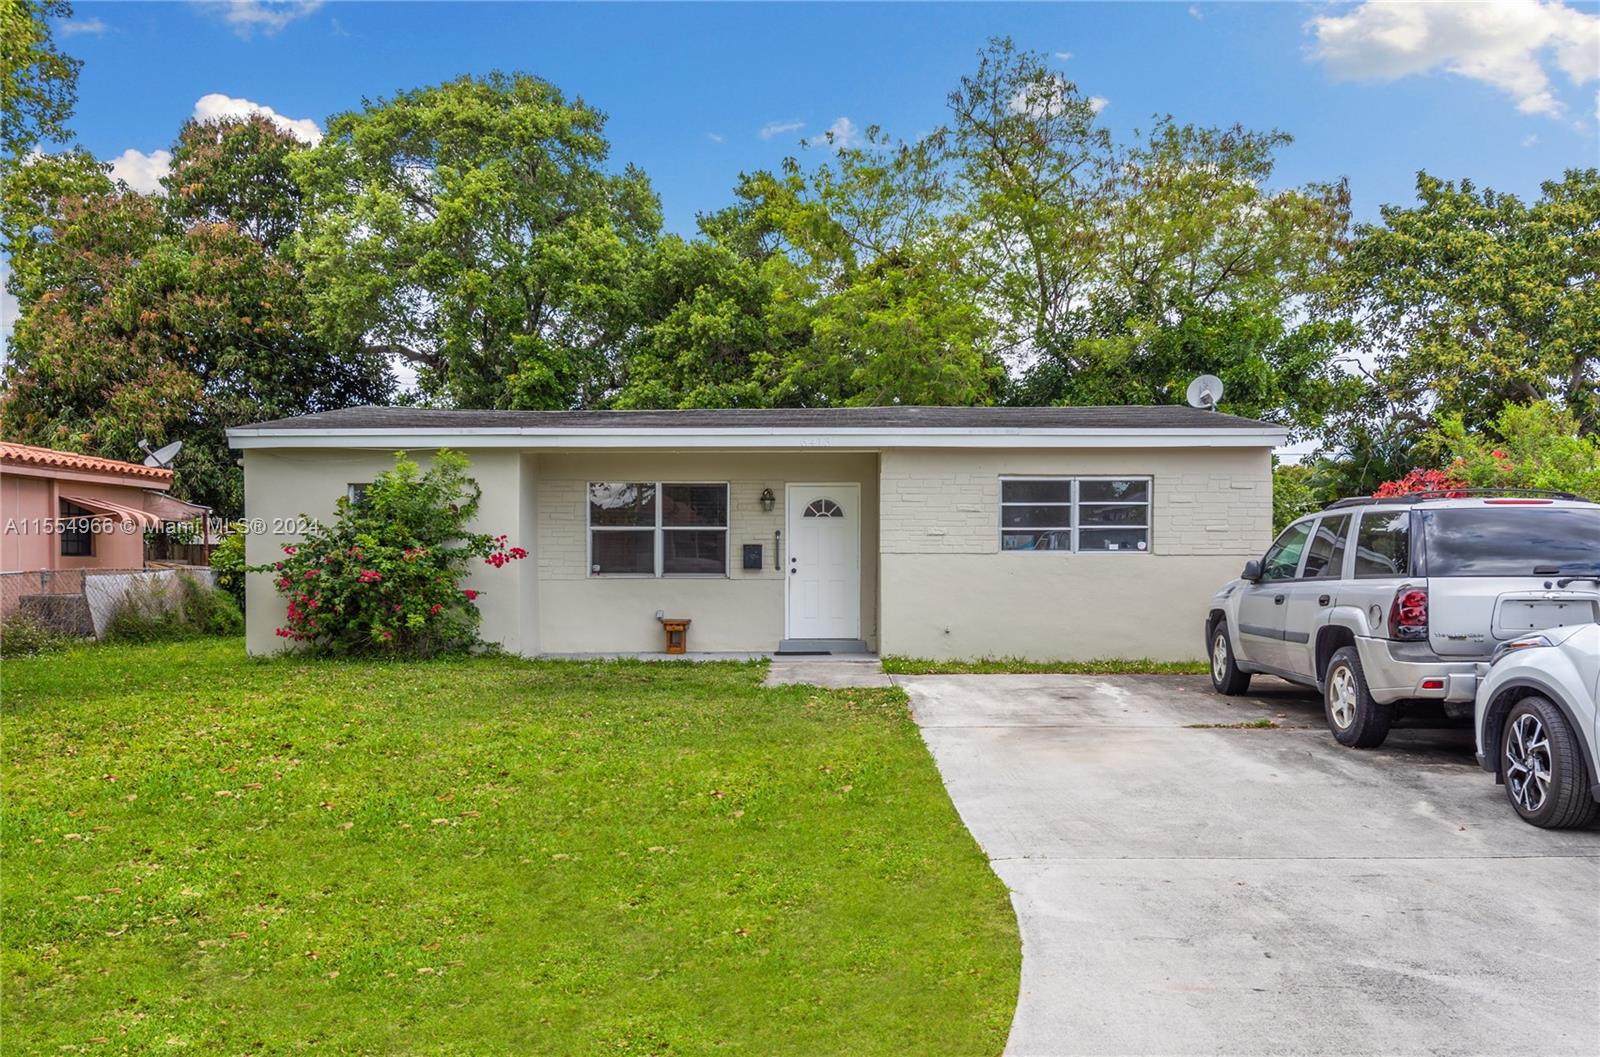 Property for Sale at 6413 Grant Ct Ct, Hollywood, Broward County, Florida - Bedrooms: 3 
Bathrooms: 1  - $349,000